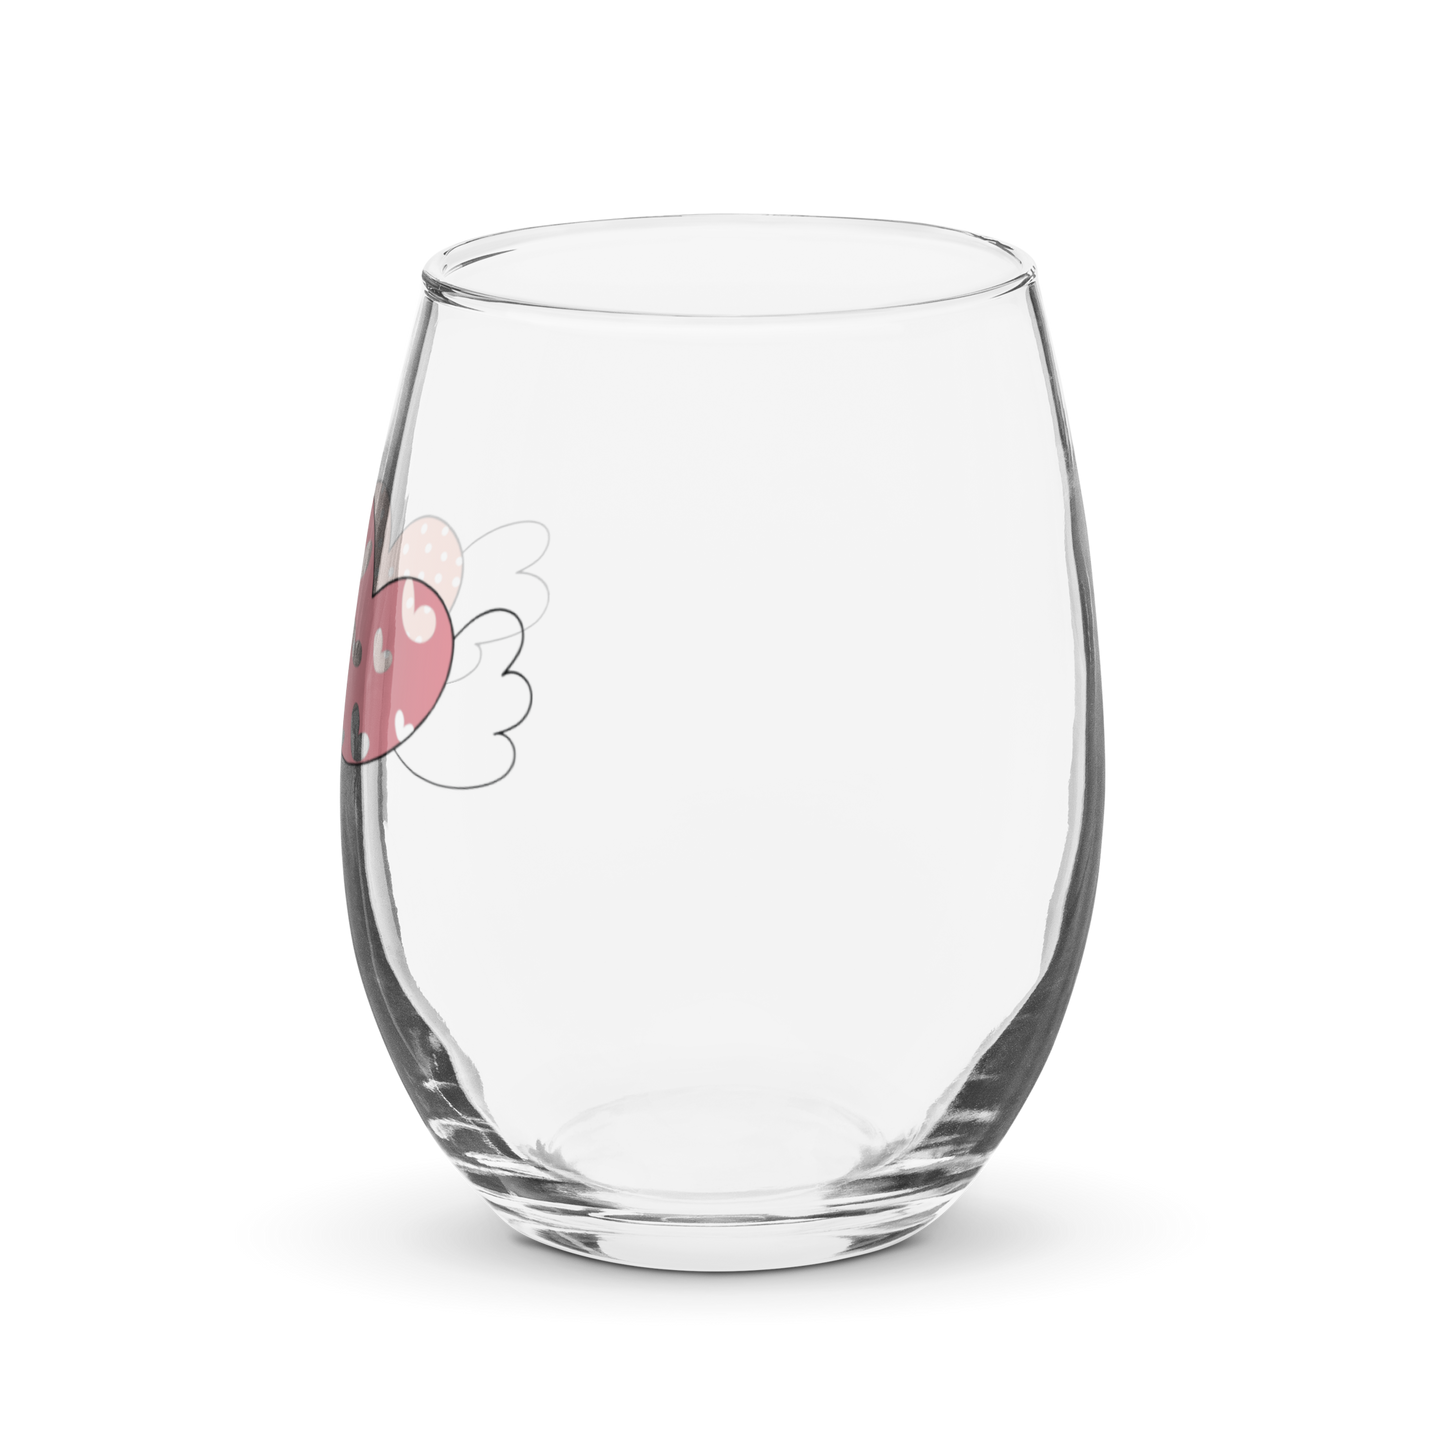 Fluttering Hearts Valentine's Stemless Wine Glass – Lovey Dovey Gnomies Collection - Expressive DeZien 